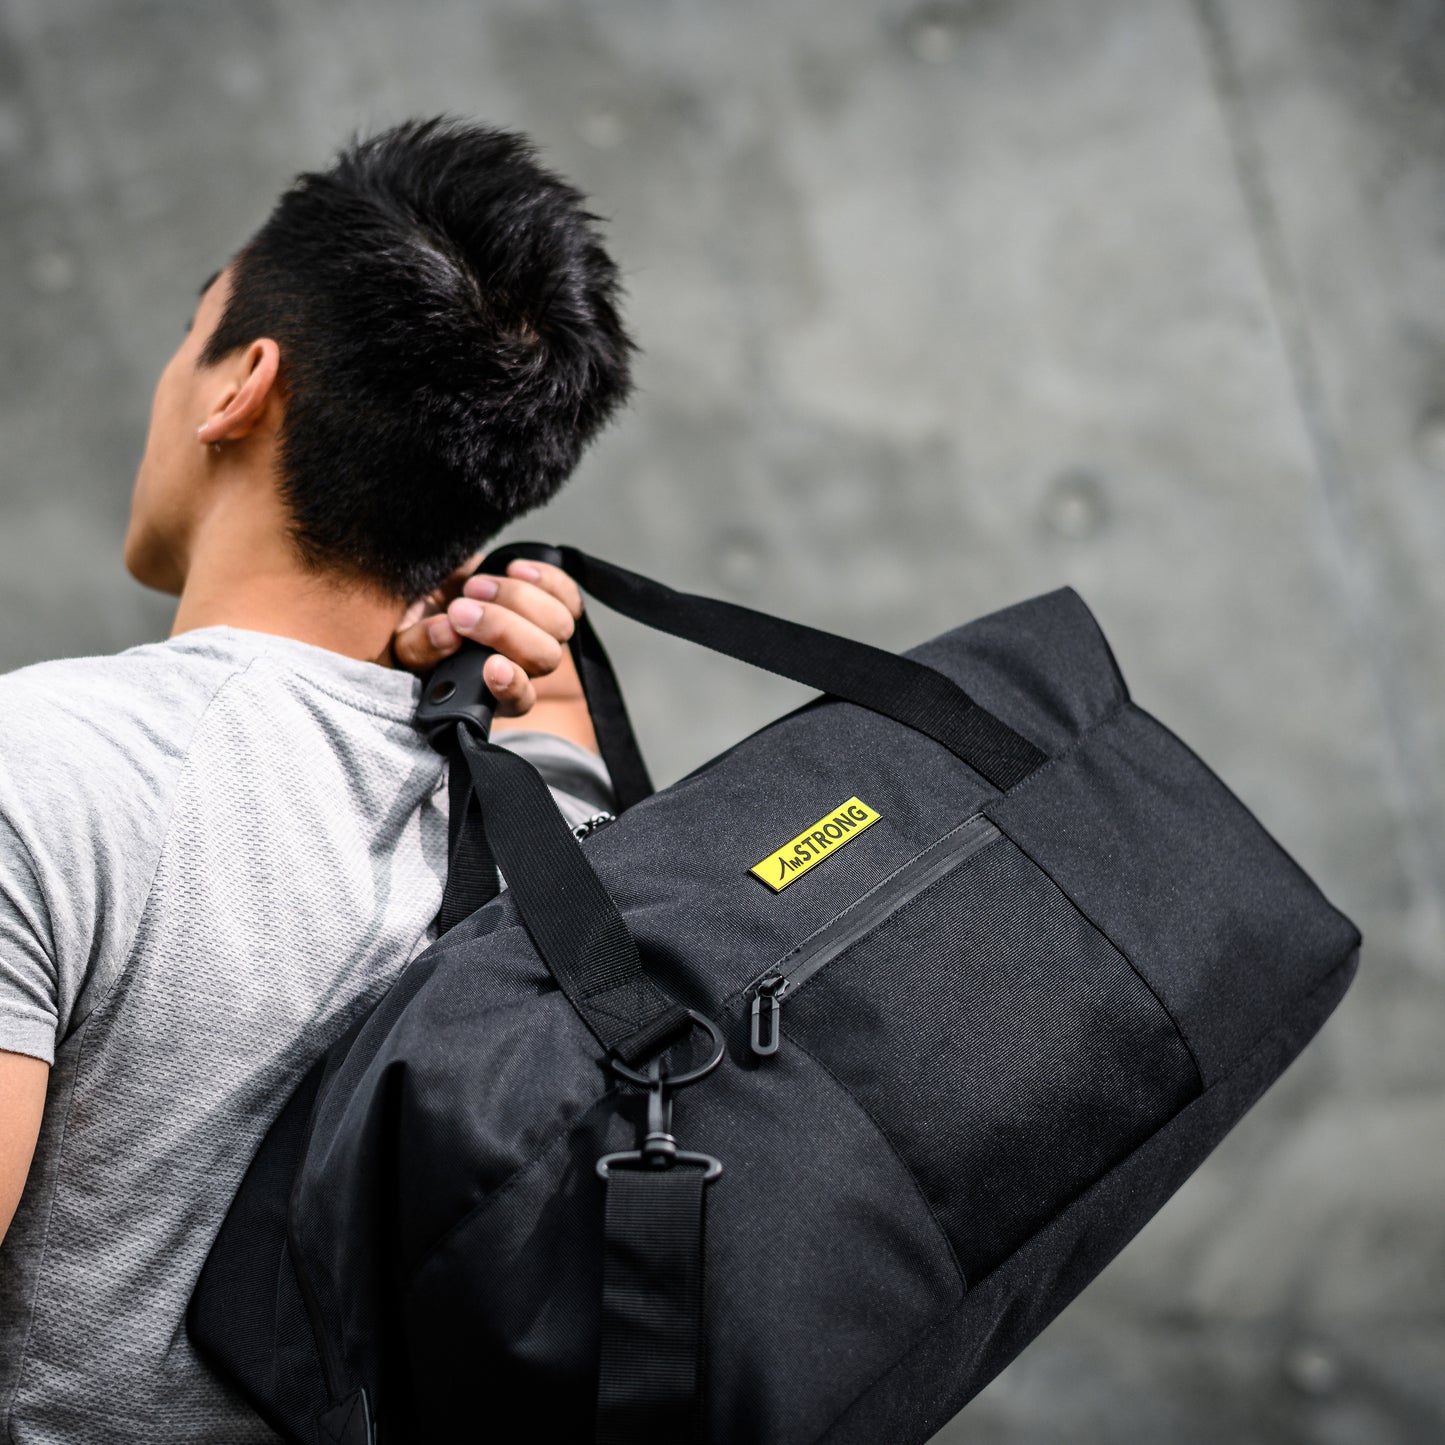 man carrying a black sport duffel which has a yellow metallic label